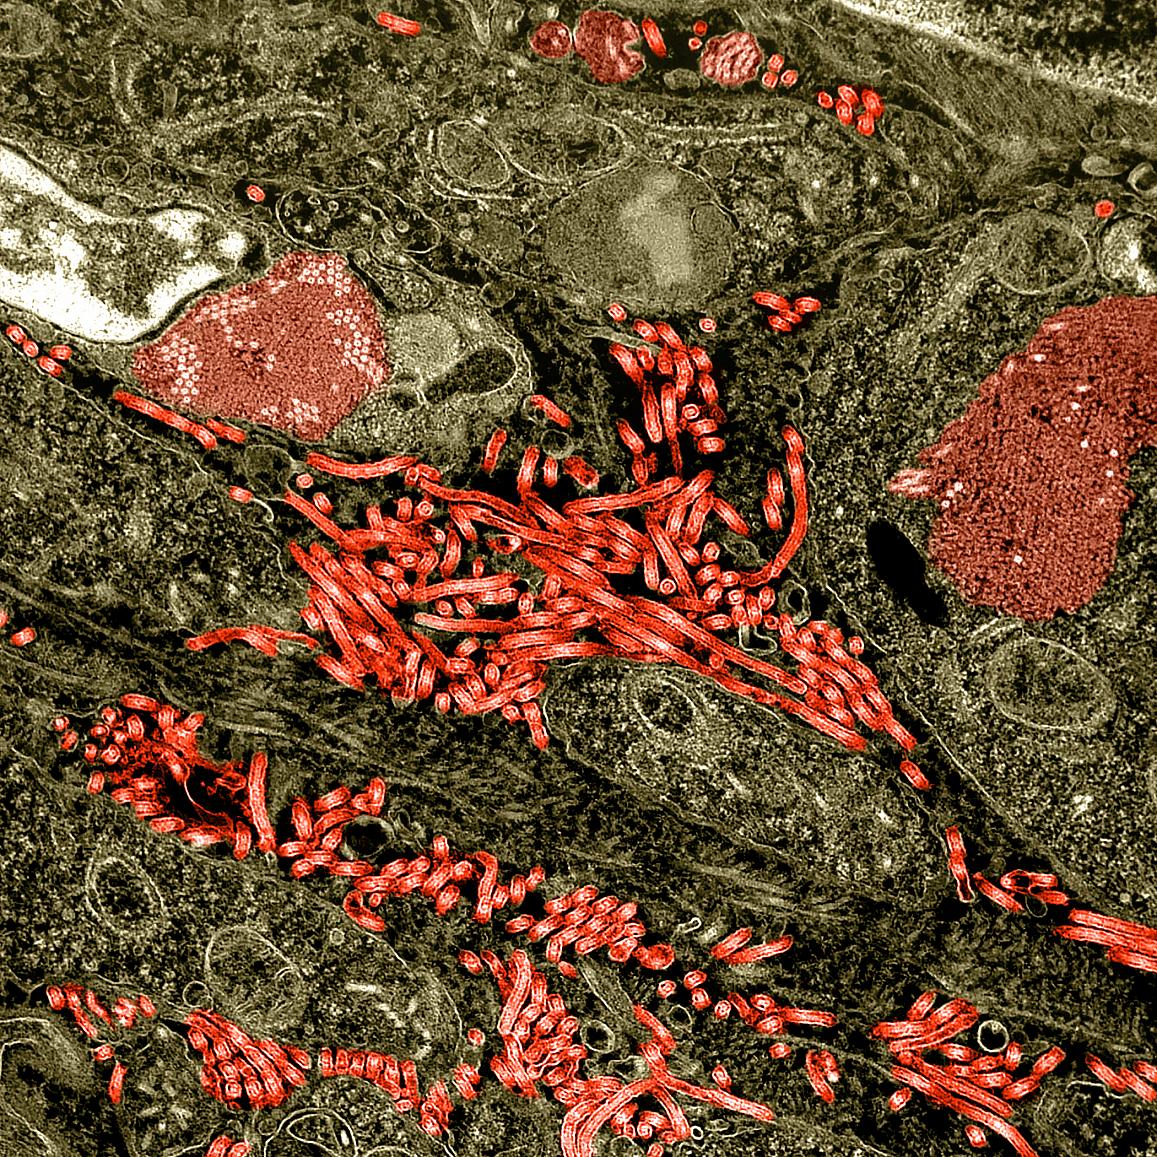 Colorized transmission electron micrograph of the ovary from a nonhuman primate infected with Ebola virus